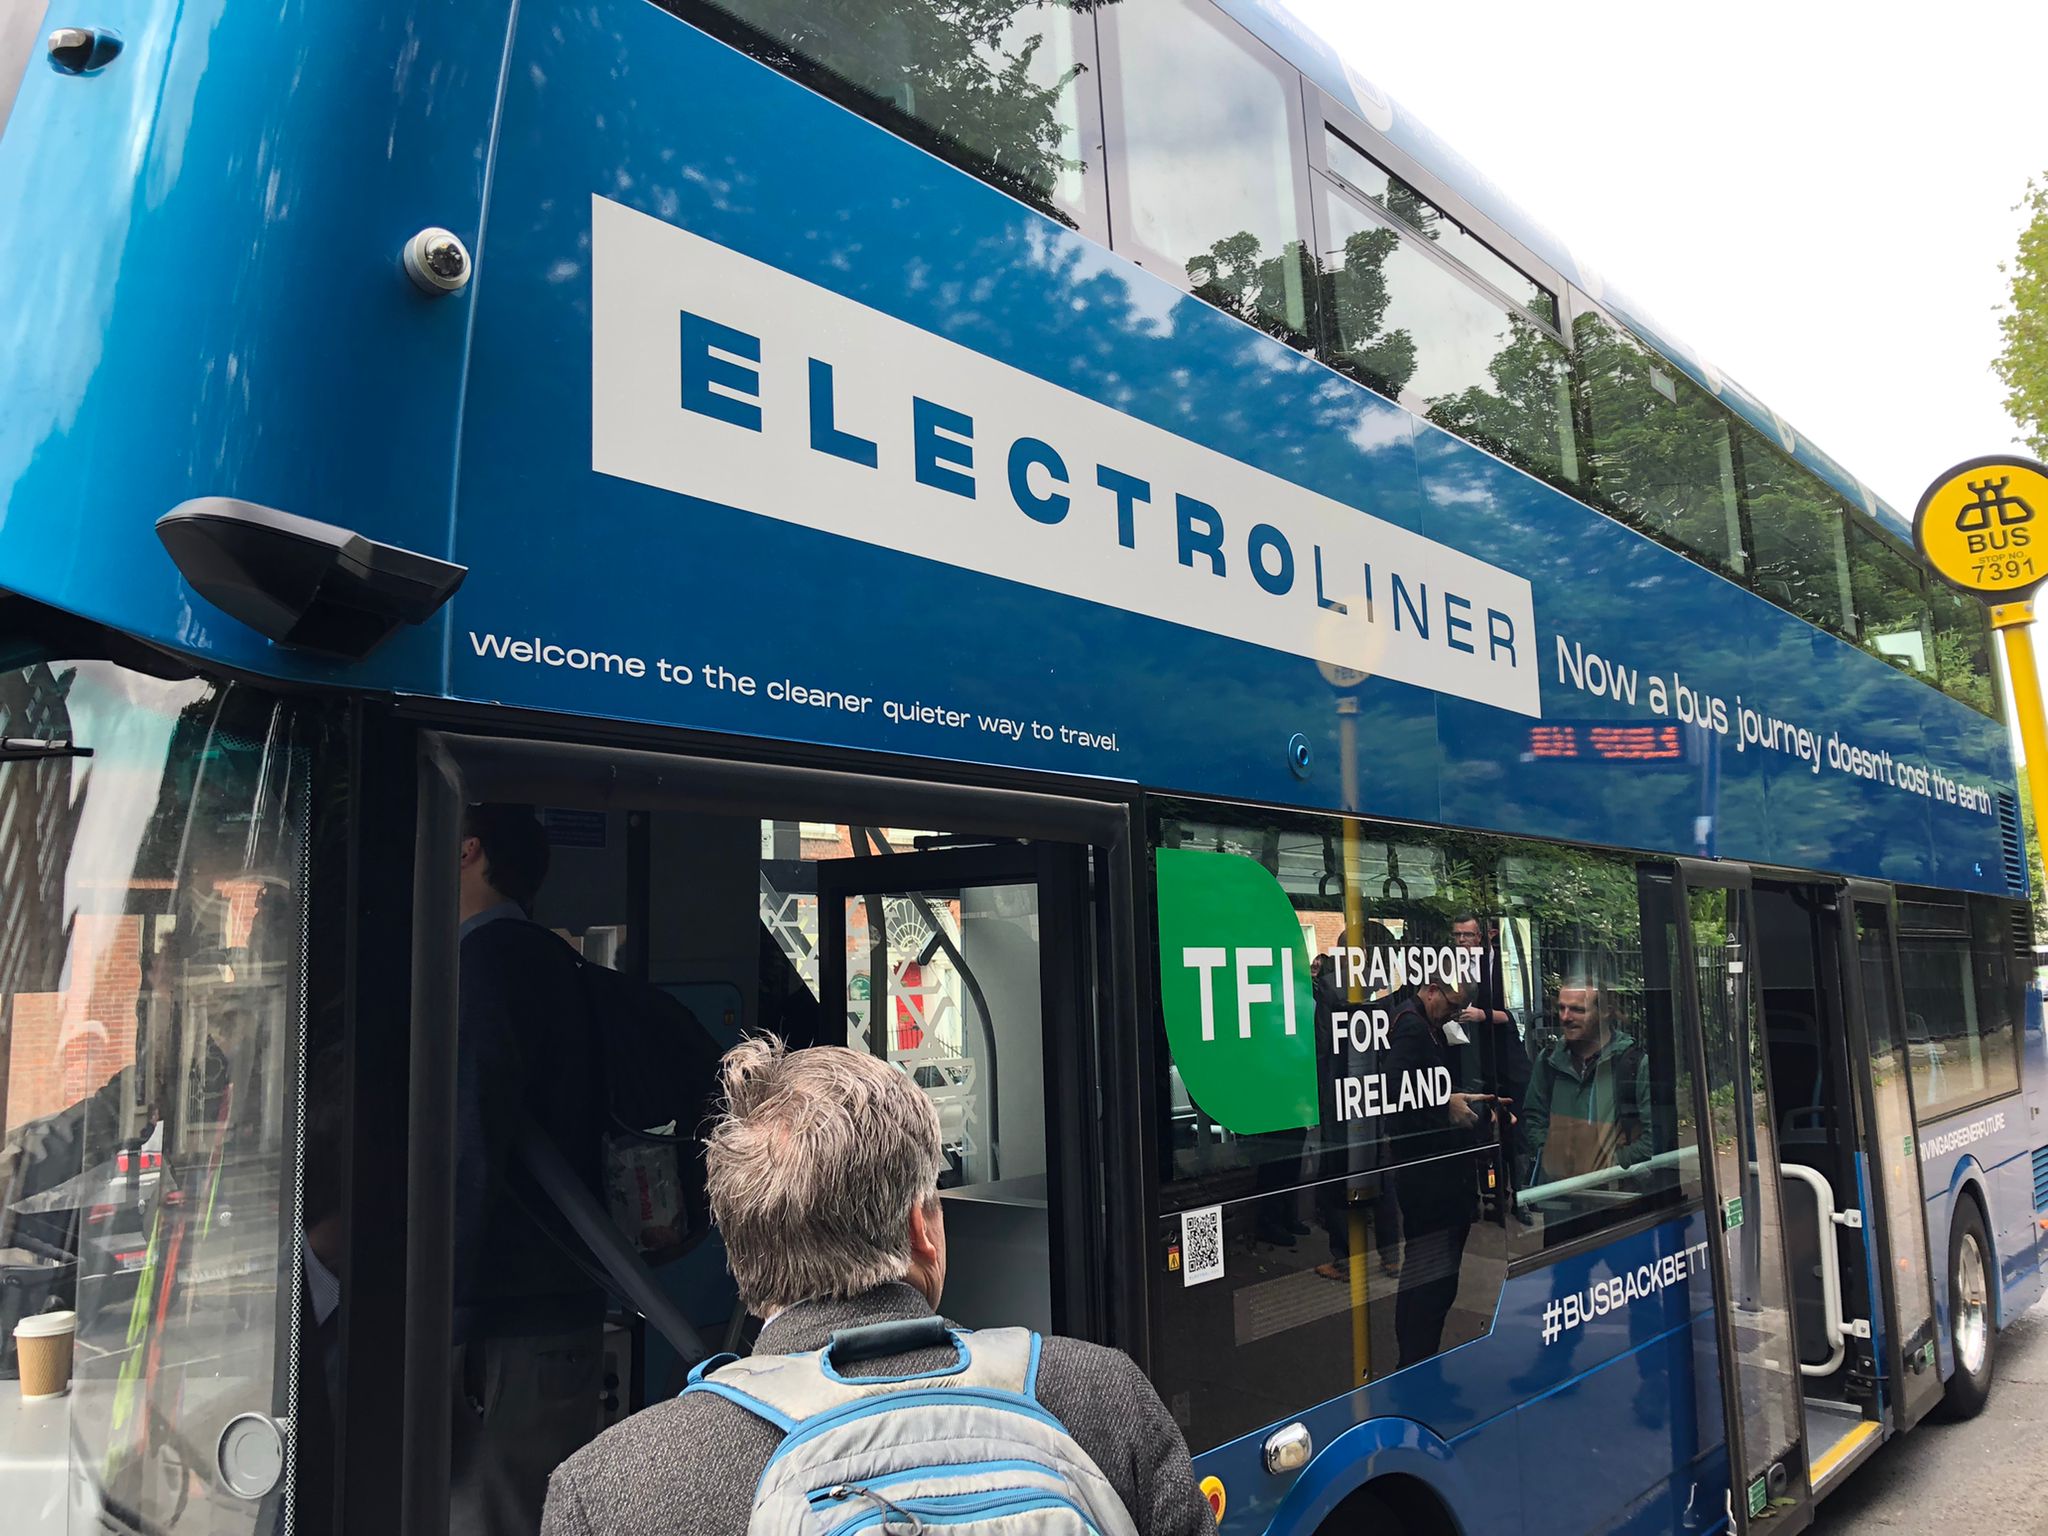 The new fully-electric buses that will take to the streets in Dublin and on the Bus Éireann network. Image: Emma Tyrrell/Newstalk